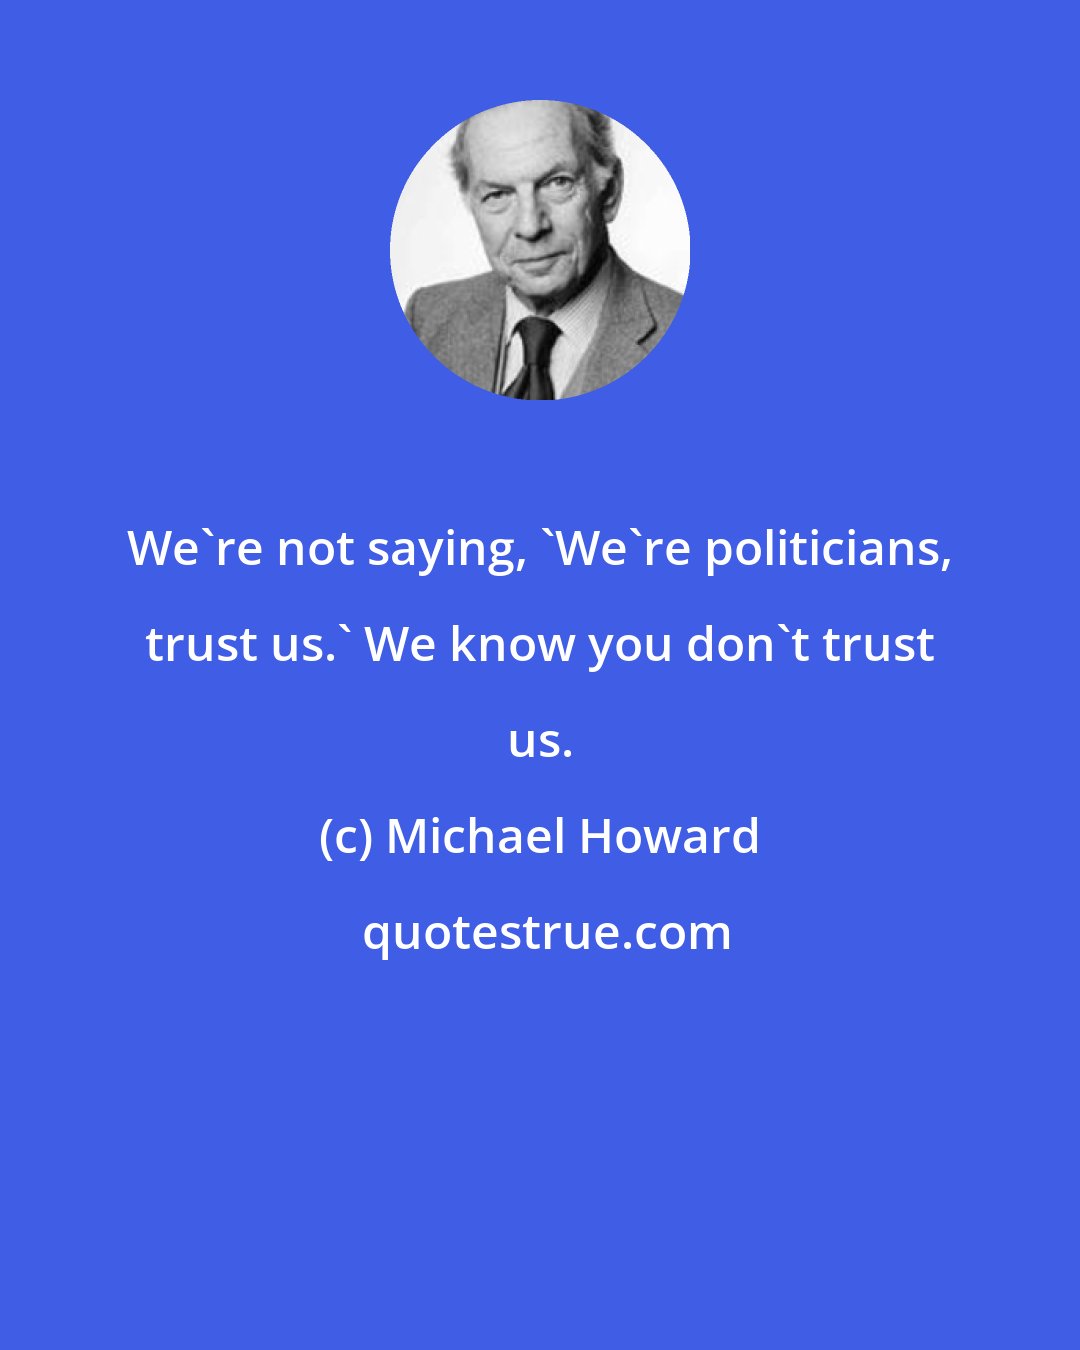 Michael Howard: We're not saying, 'We're politicians, trust us.' We know you don't trust us.